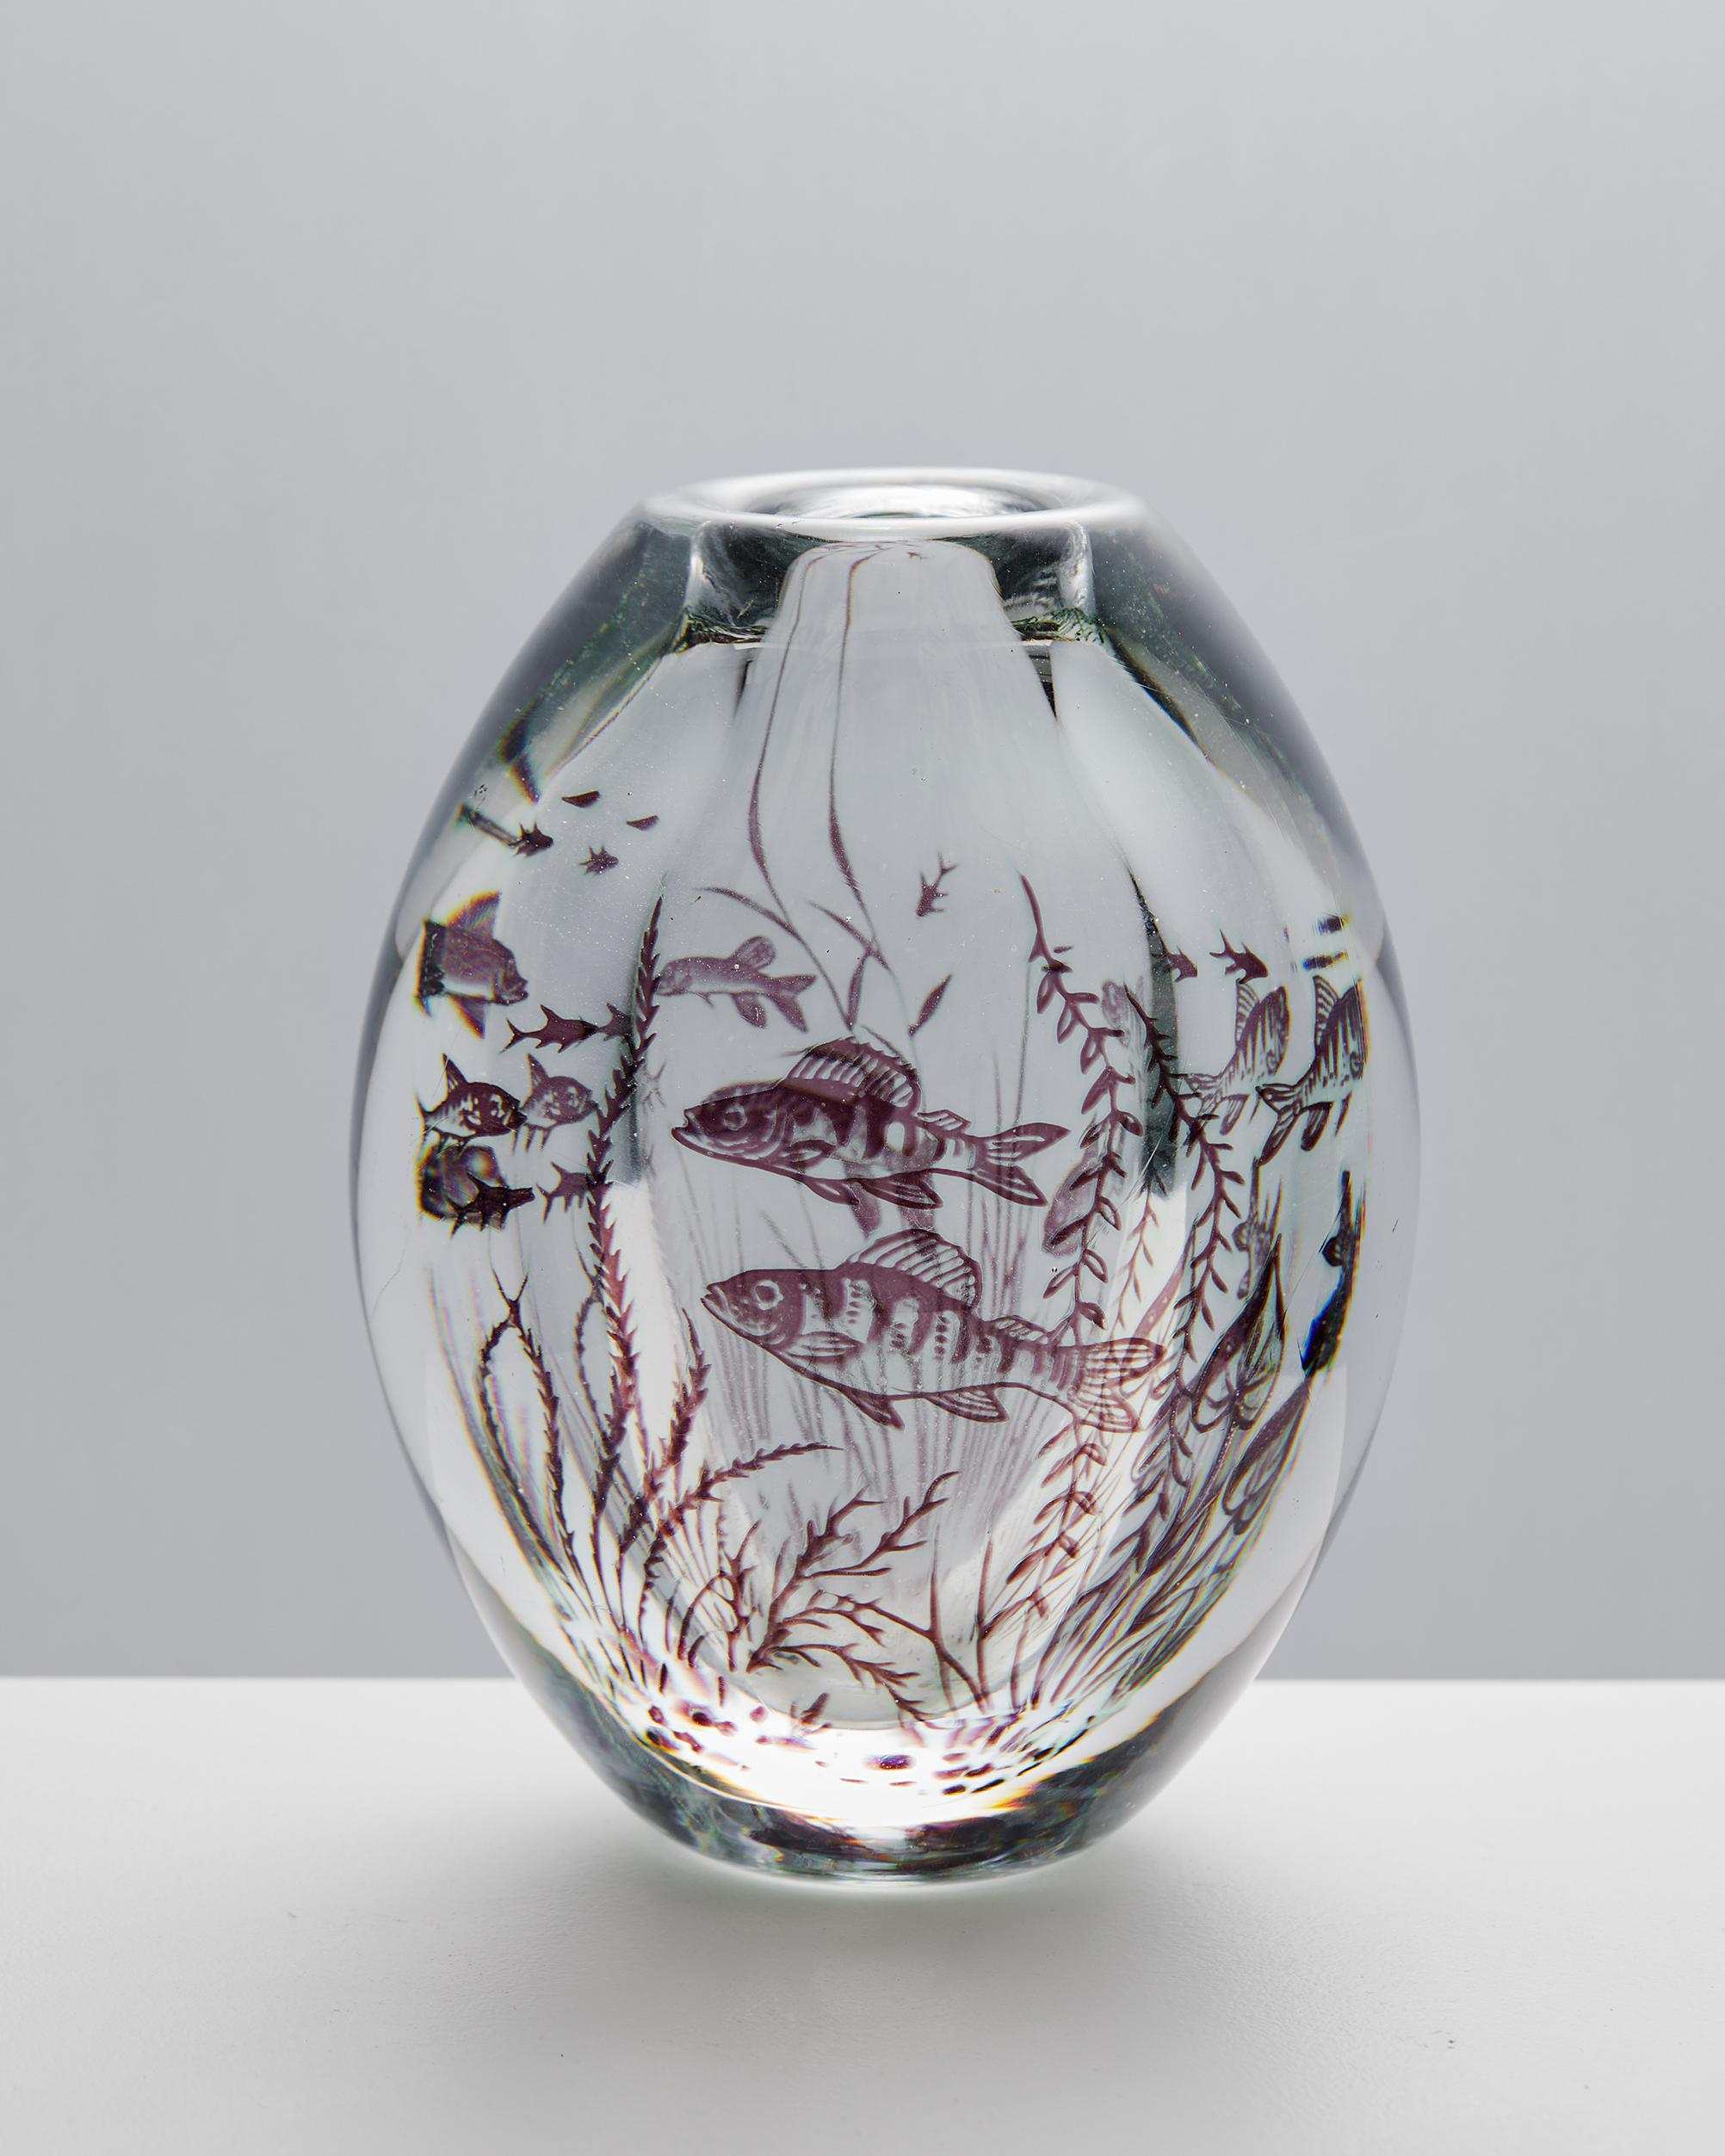 Vase ‘Fish Graal’ designed by Edward Hald for Orrefors,
Sweden, 1949.

Glass.

Signed.

Dimensions: 
Height: 16 cm / 6 1/4''
Diameter: 12 cm / 4 3/4''.

Edward Hald (1883 – 1980) is one of the well-known Swedish glass artists who have worked for